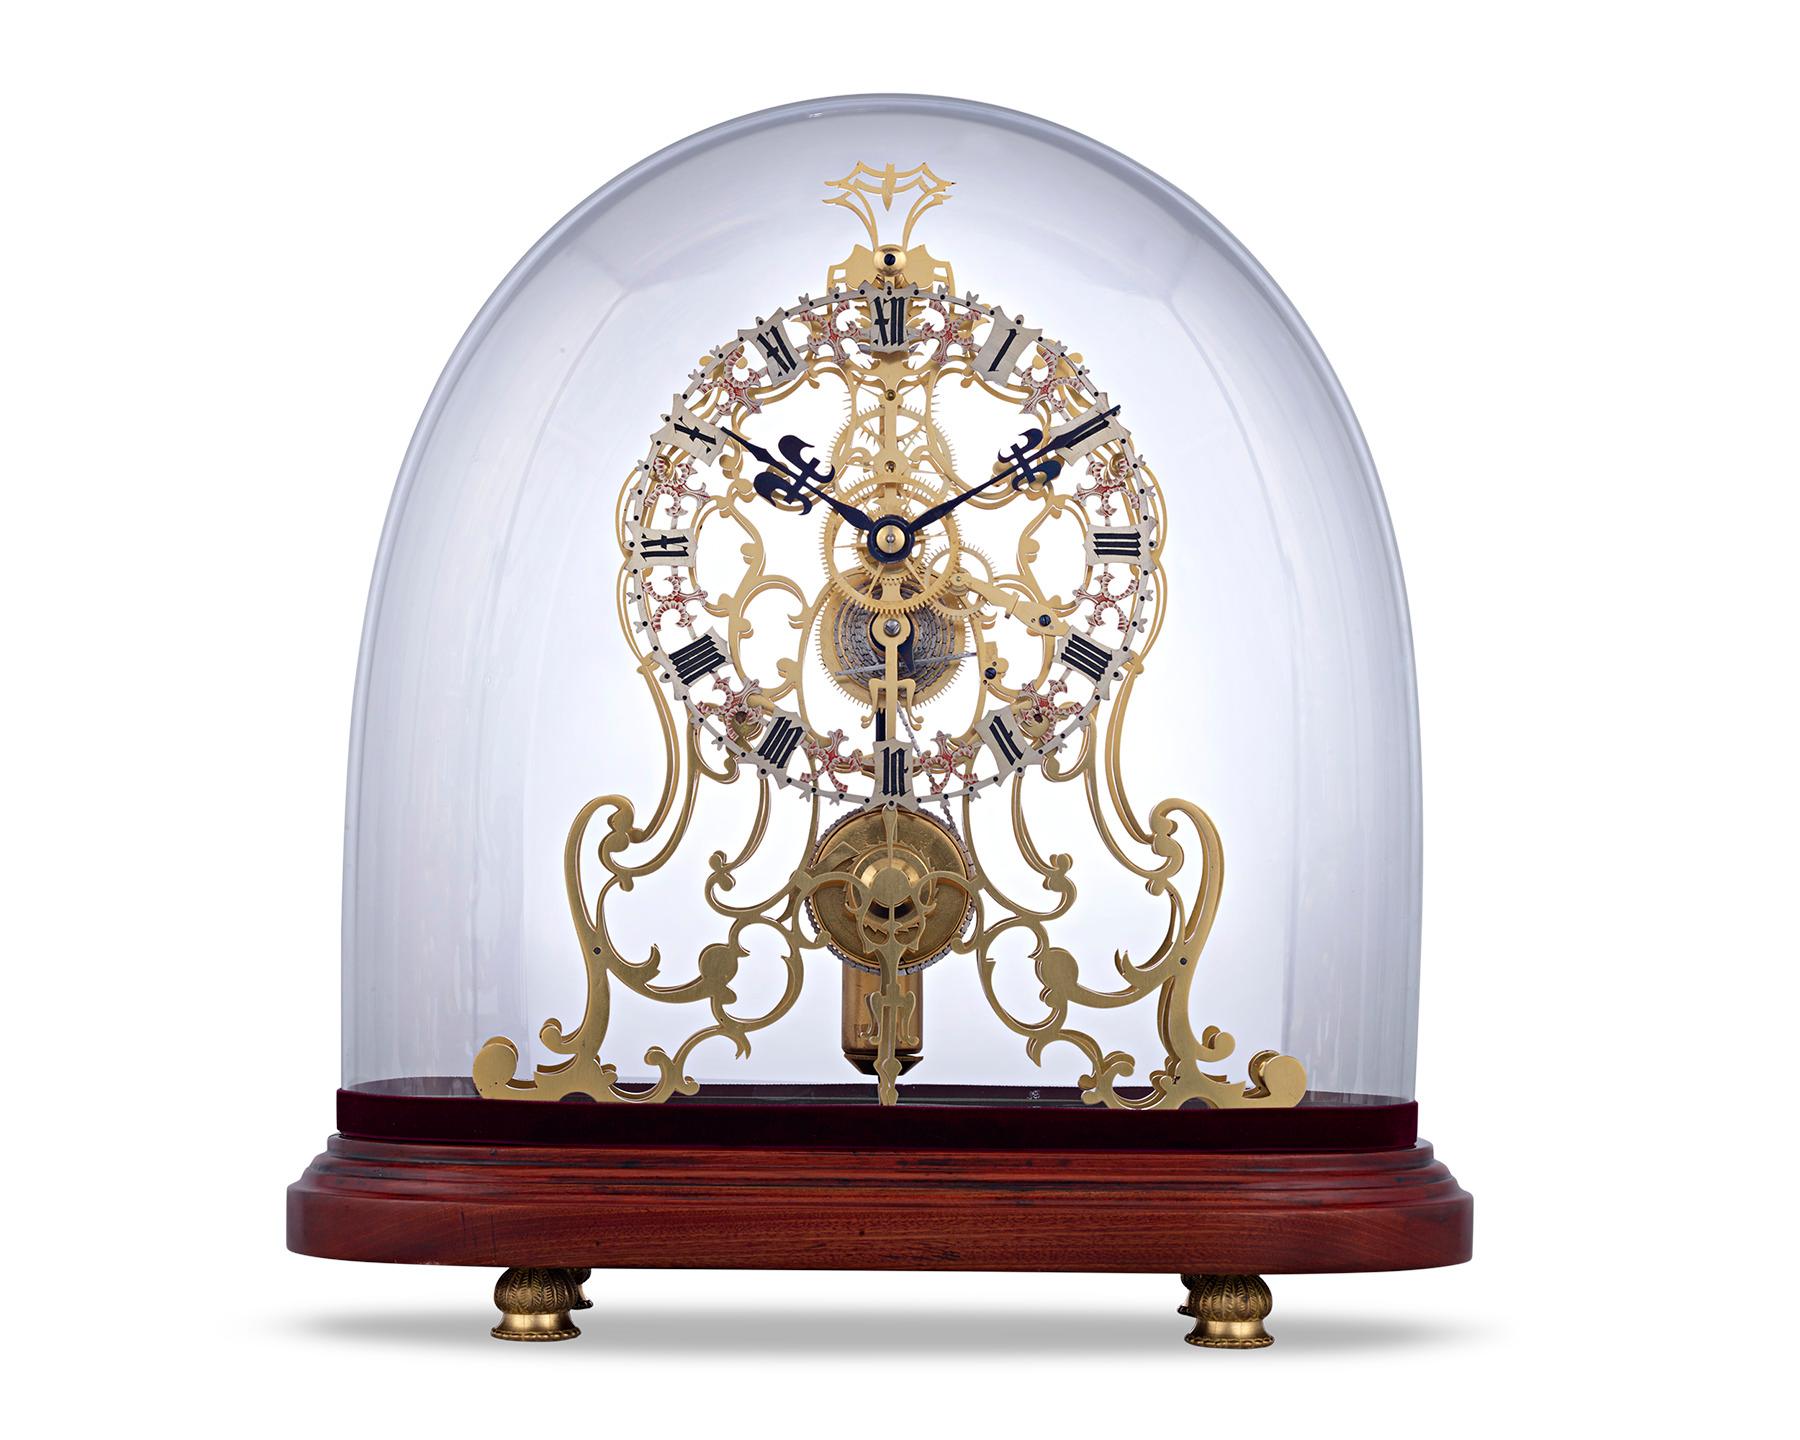 This exceptional arabesque skeleton clock is a stellar example of English clockmaking from the preeminent English firm of Evans of Handsworth. The complex timepiece incorporates both an unusual, oversized dial and a complex 8-day triple plate